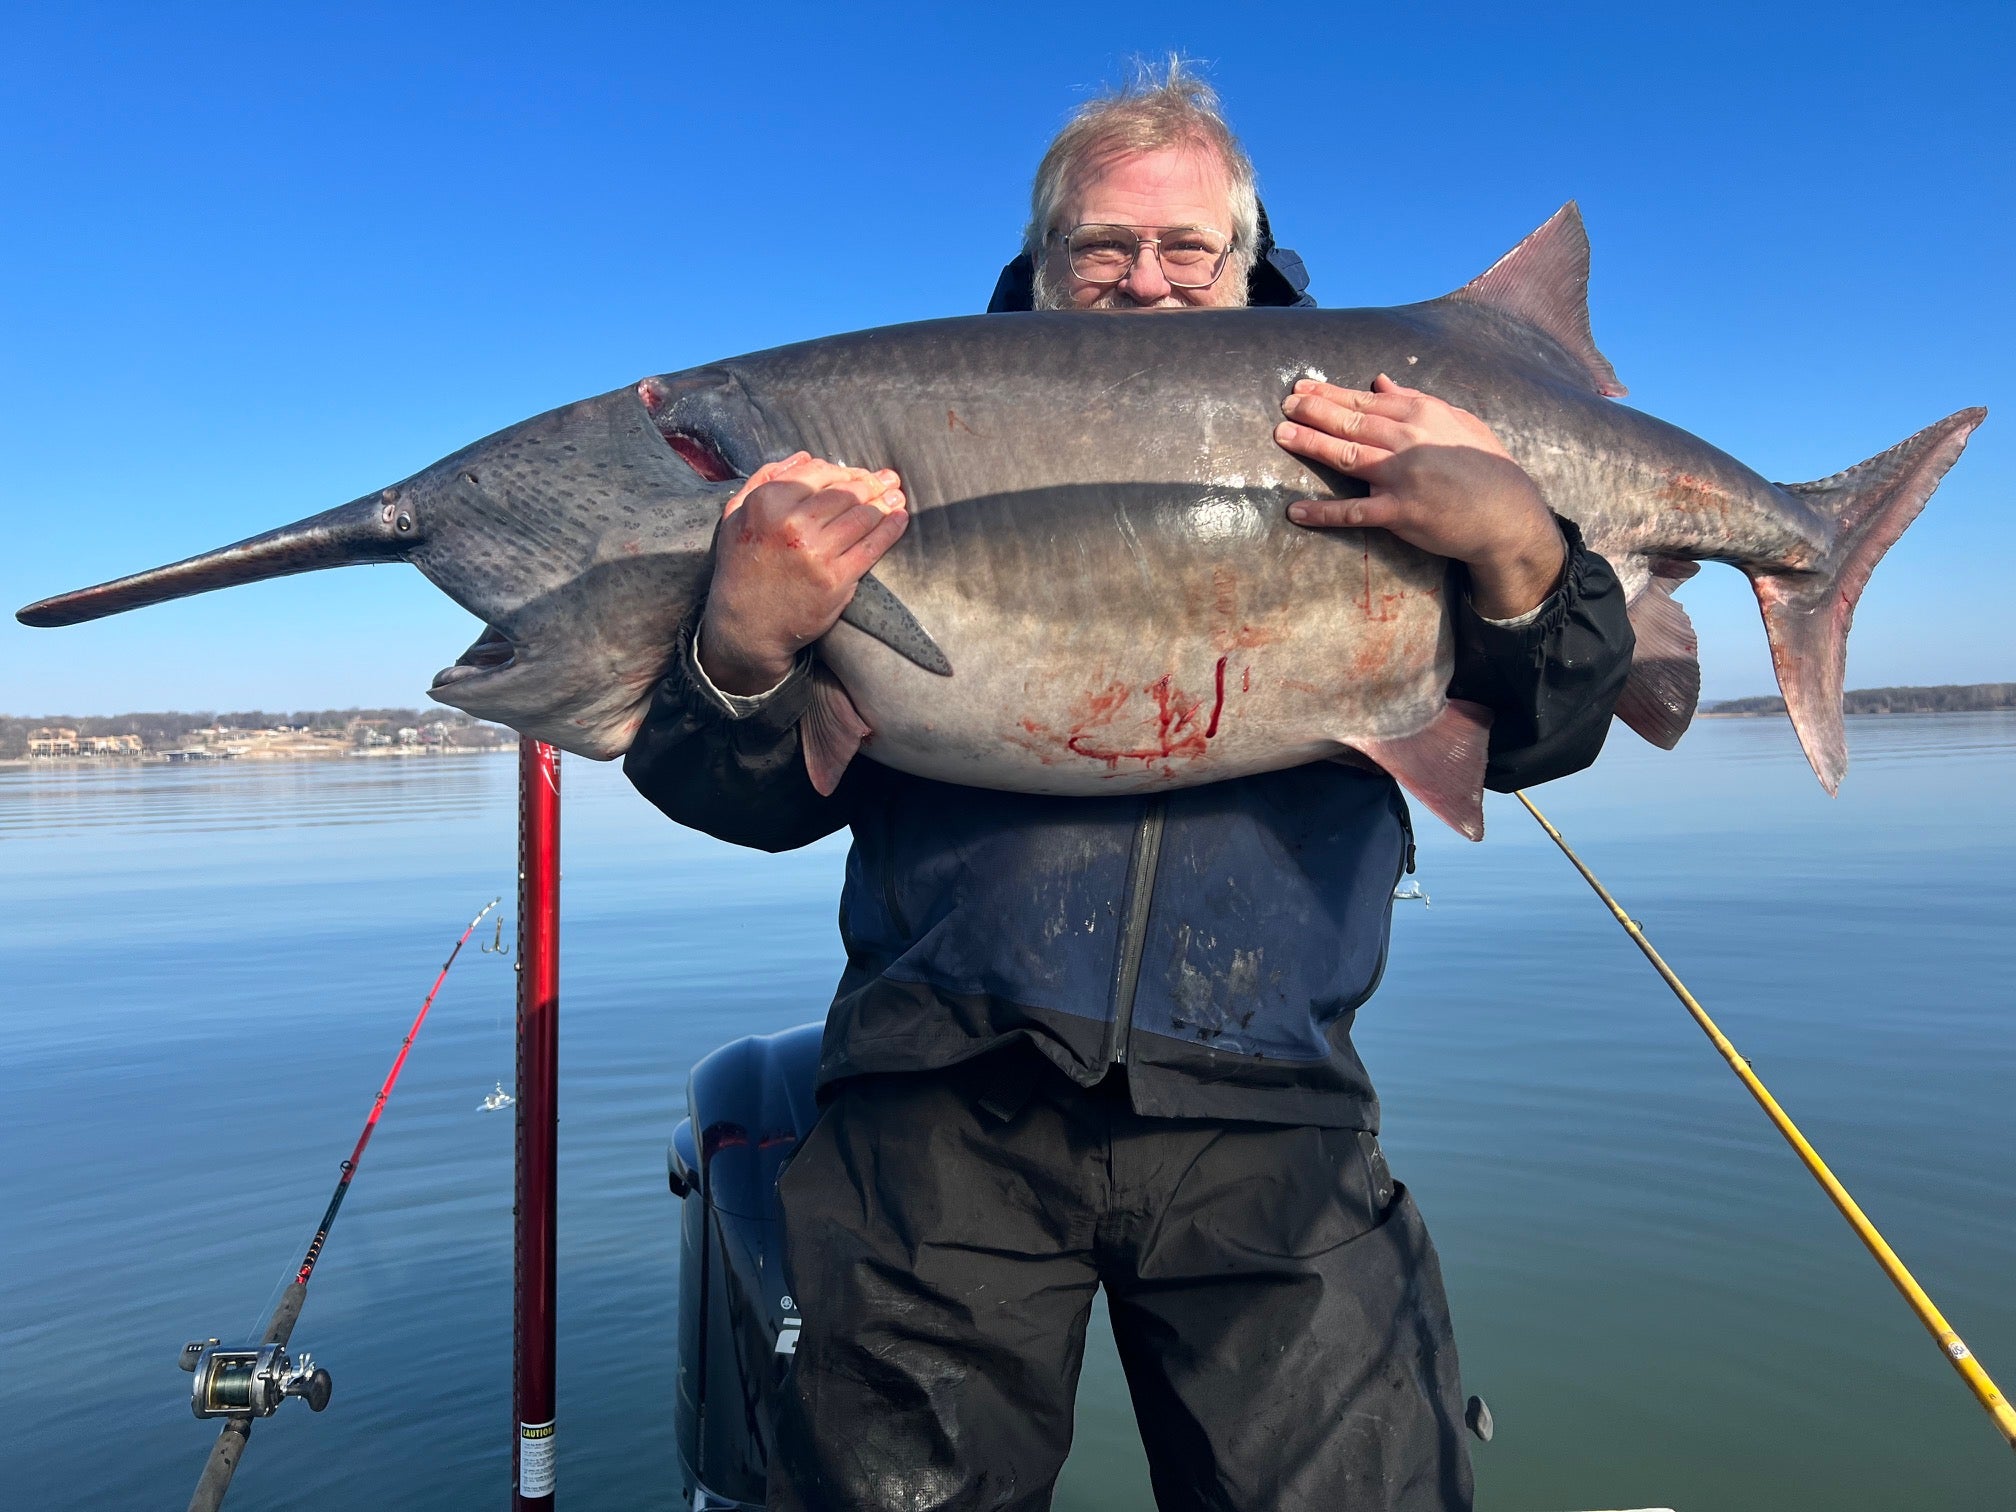 First-Time Angler Takes a Giant Paddlefish